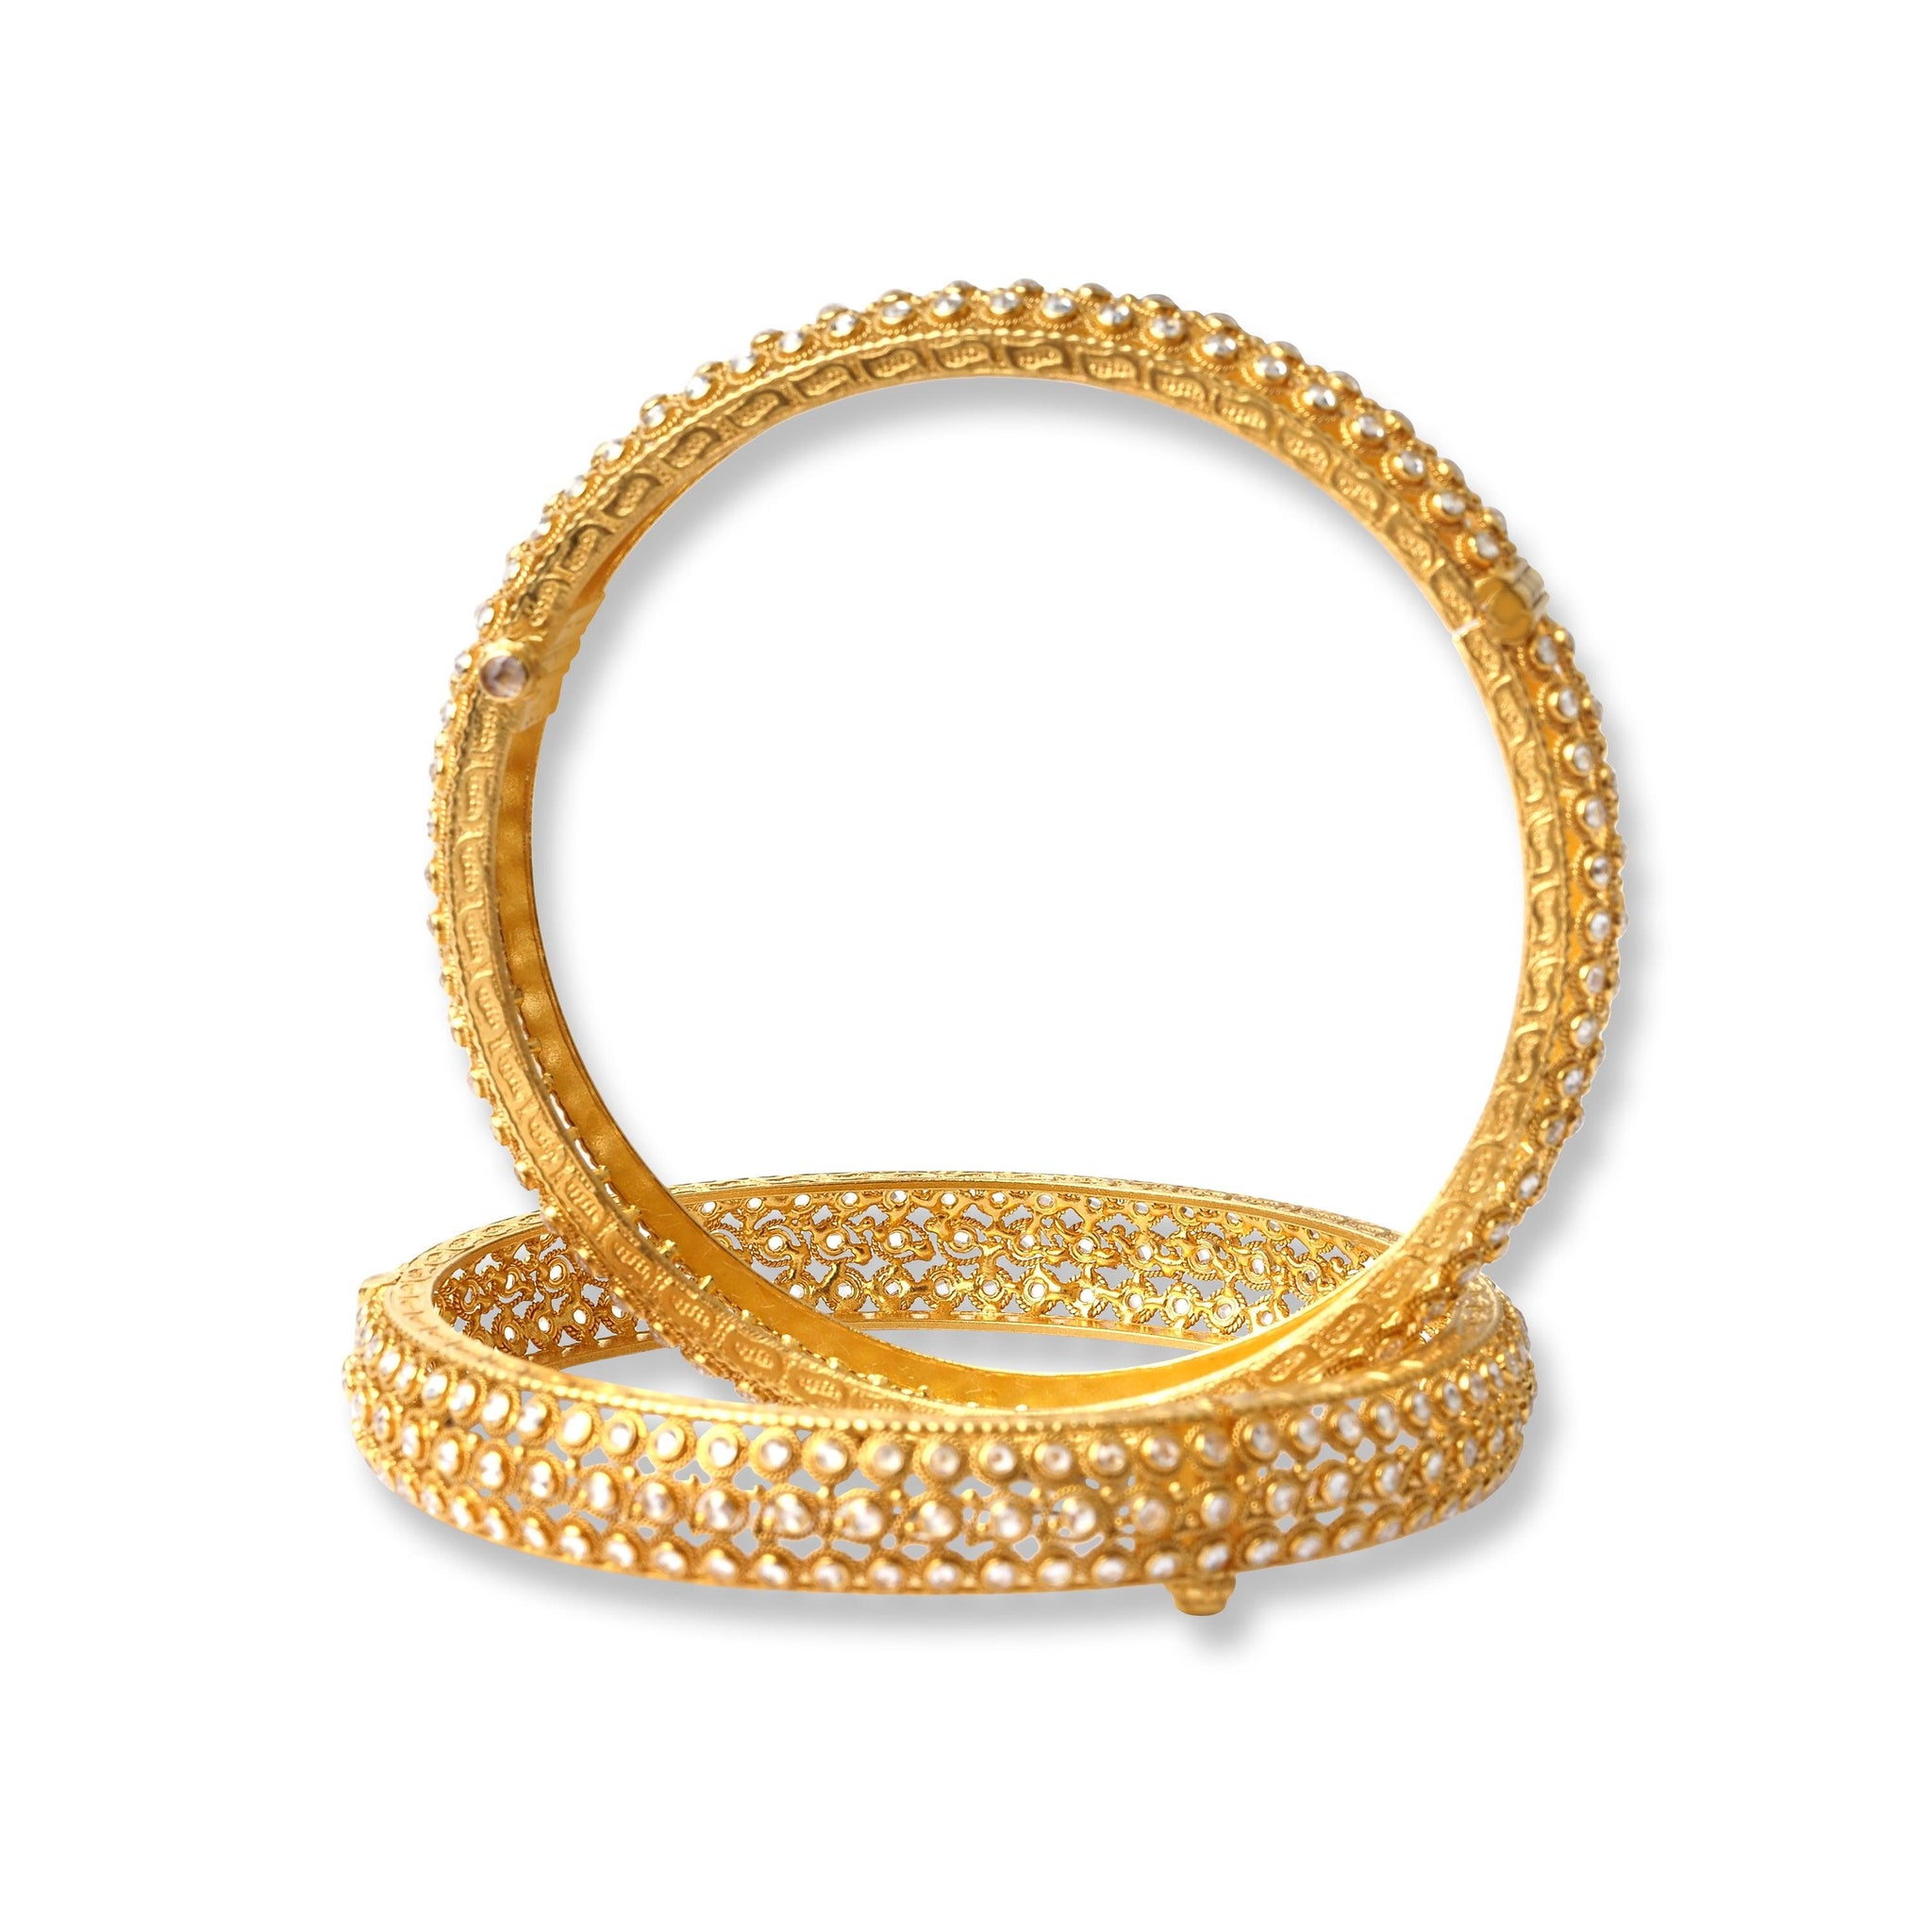 Pair of 22ct Gold Antiquated Look Openable Bangles with Polki Style Stones (56.1g) B-8282